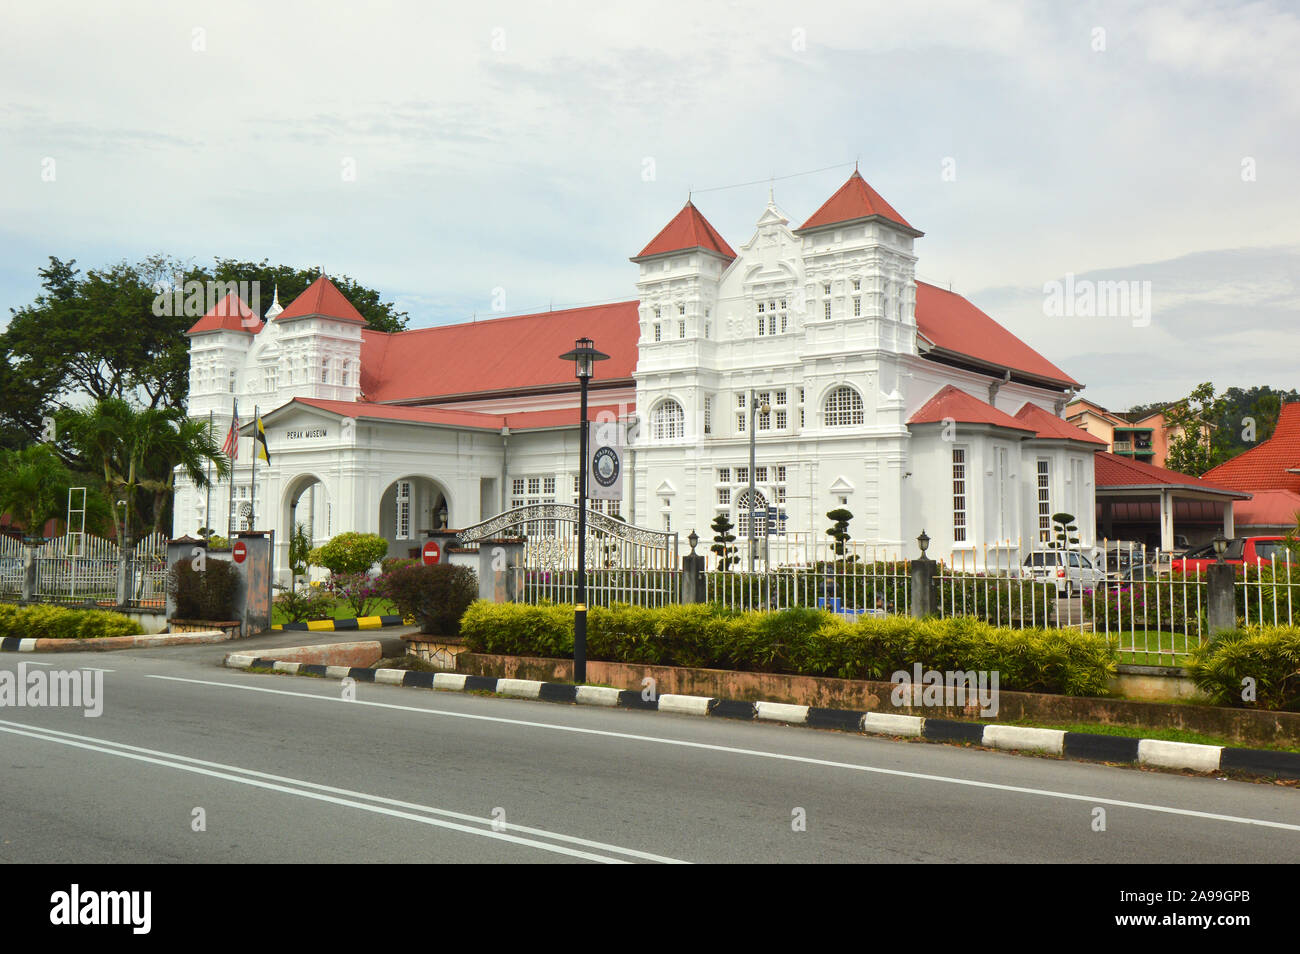 This museum is the oldest museum in Peninsular Malaysia. It is located in the town of Taiping, about 85 km from Ipoh, the capital of Perak, Malaysia. Stock Photo